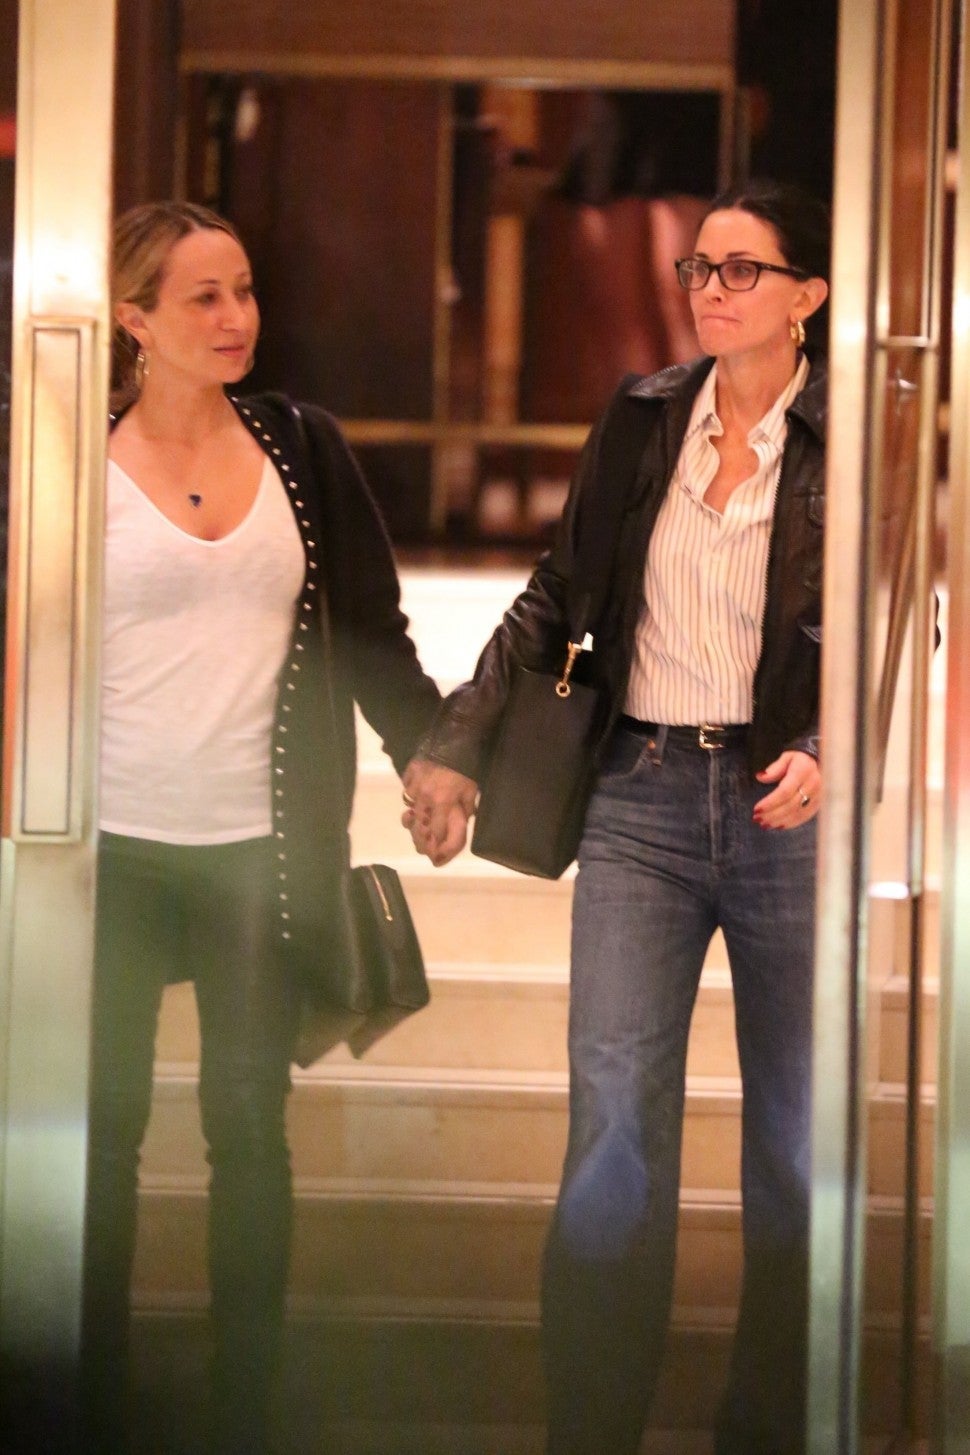 Courteney Cox and Jennifer Meyer hold hands as they leave Jennifer Aniston's 51st birthday party at the Sunset Tower Hotel in West Hollywood.